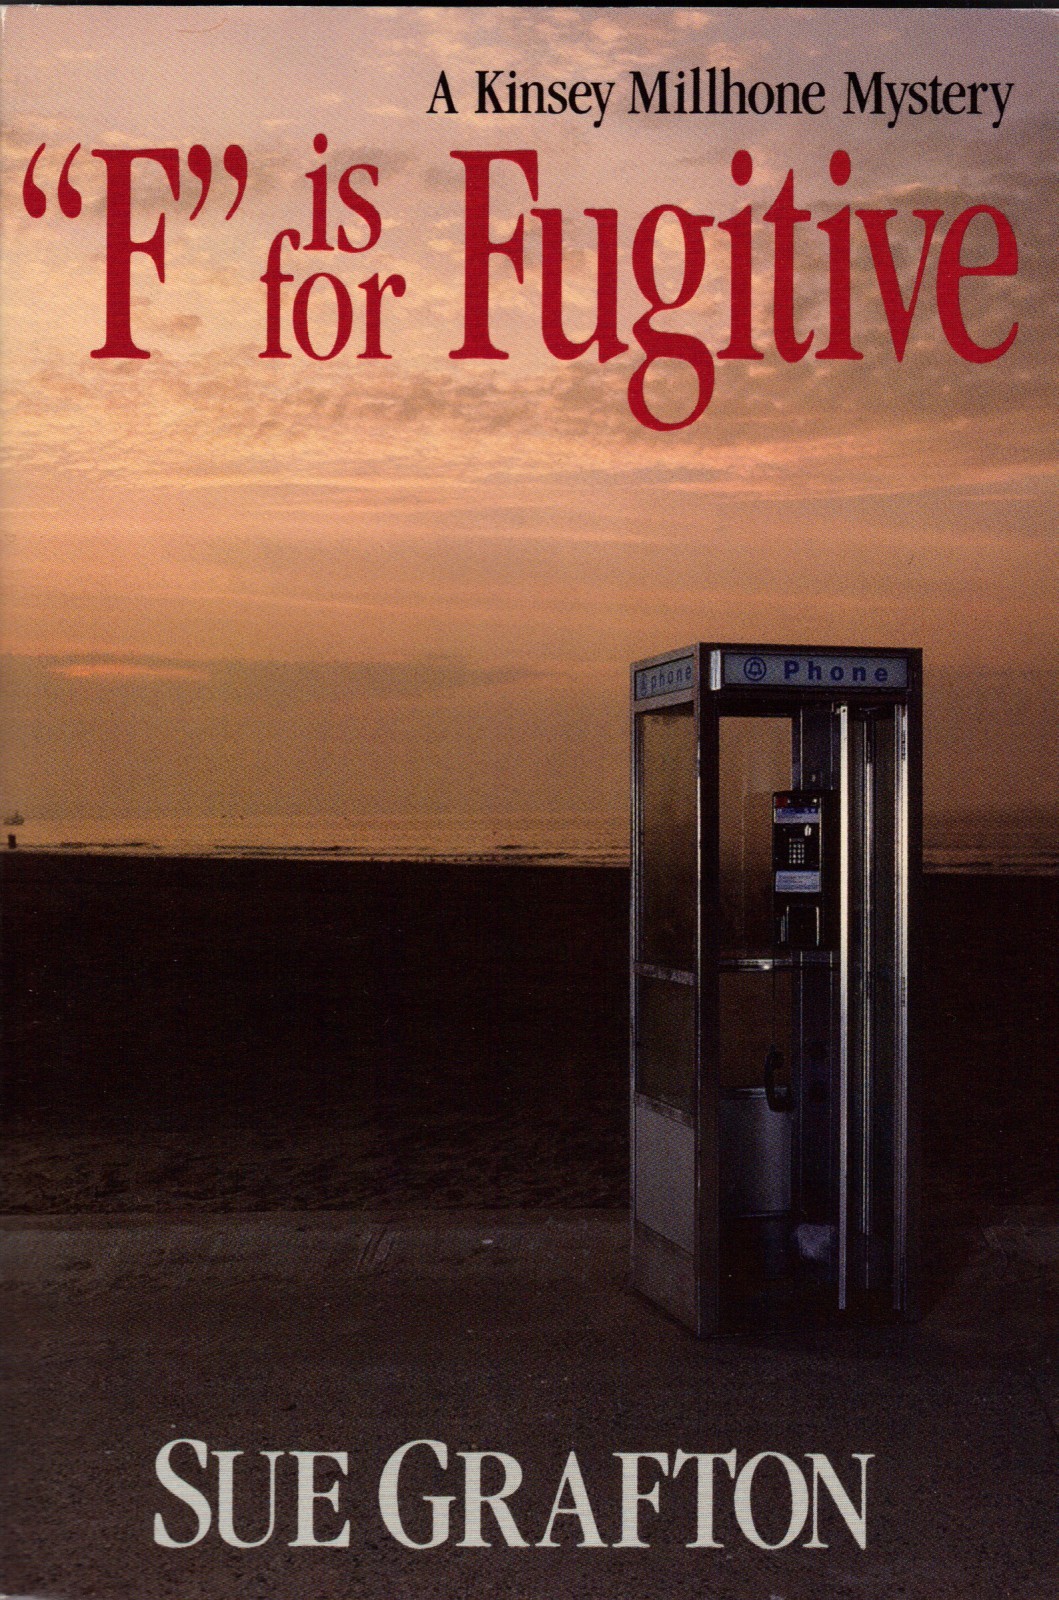 F Is for Fugitive